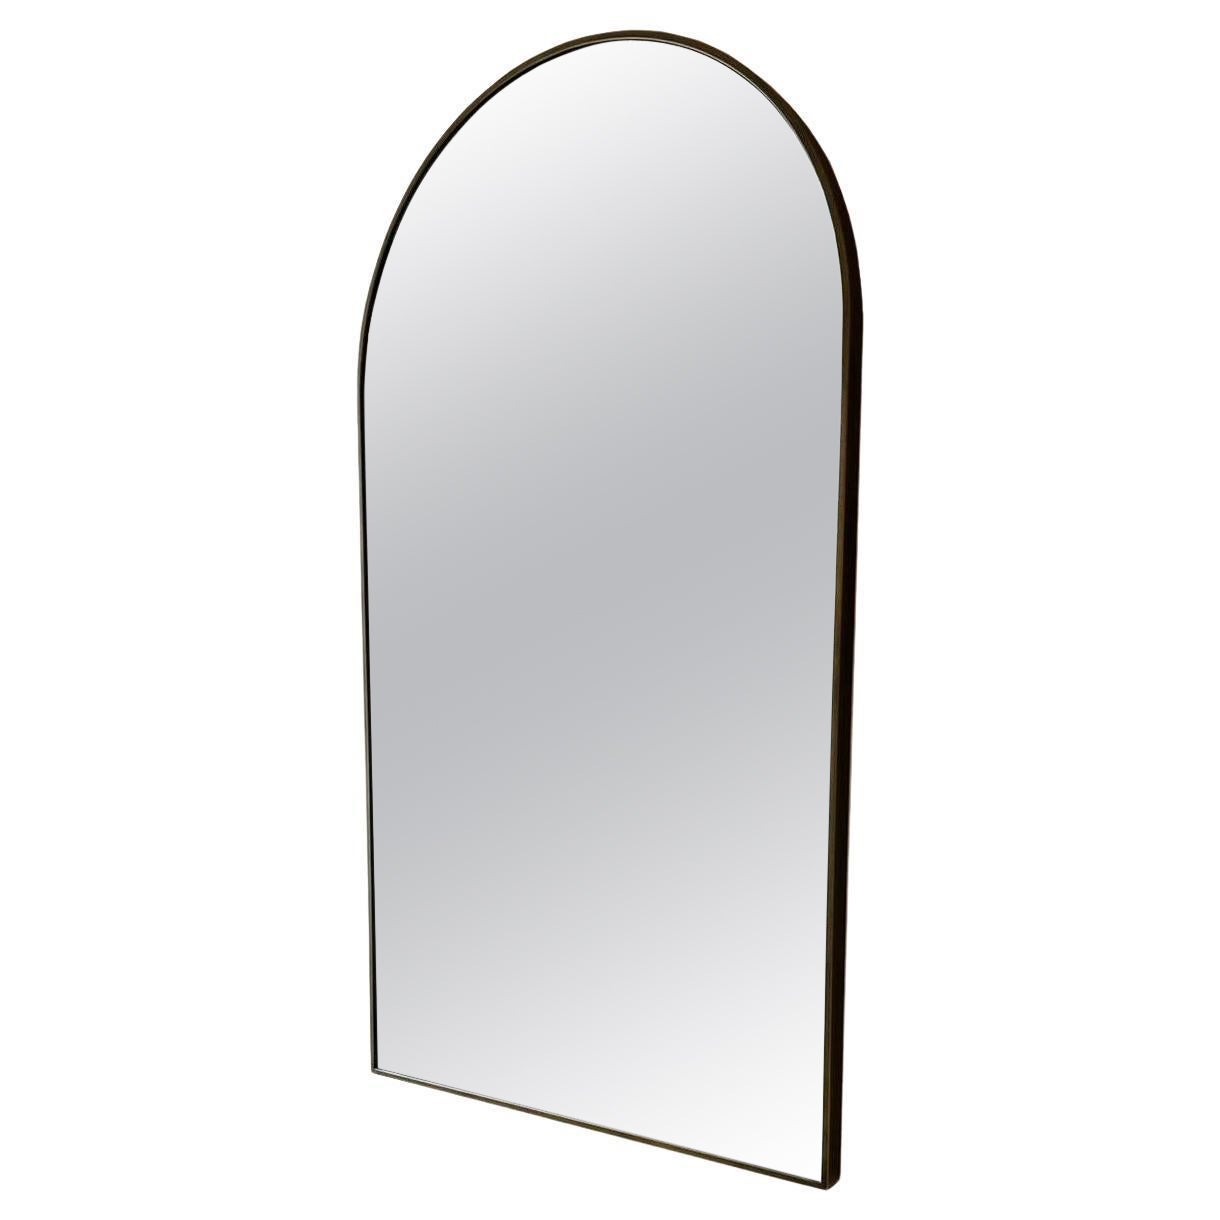 Arched Round Top Clear Mirror with Bronze Frame, Contemporary